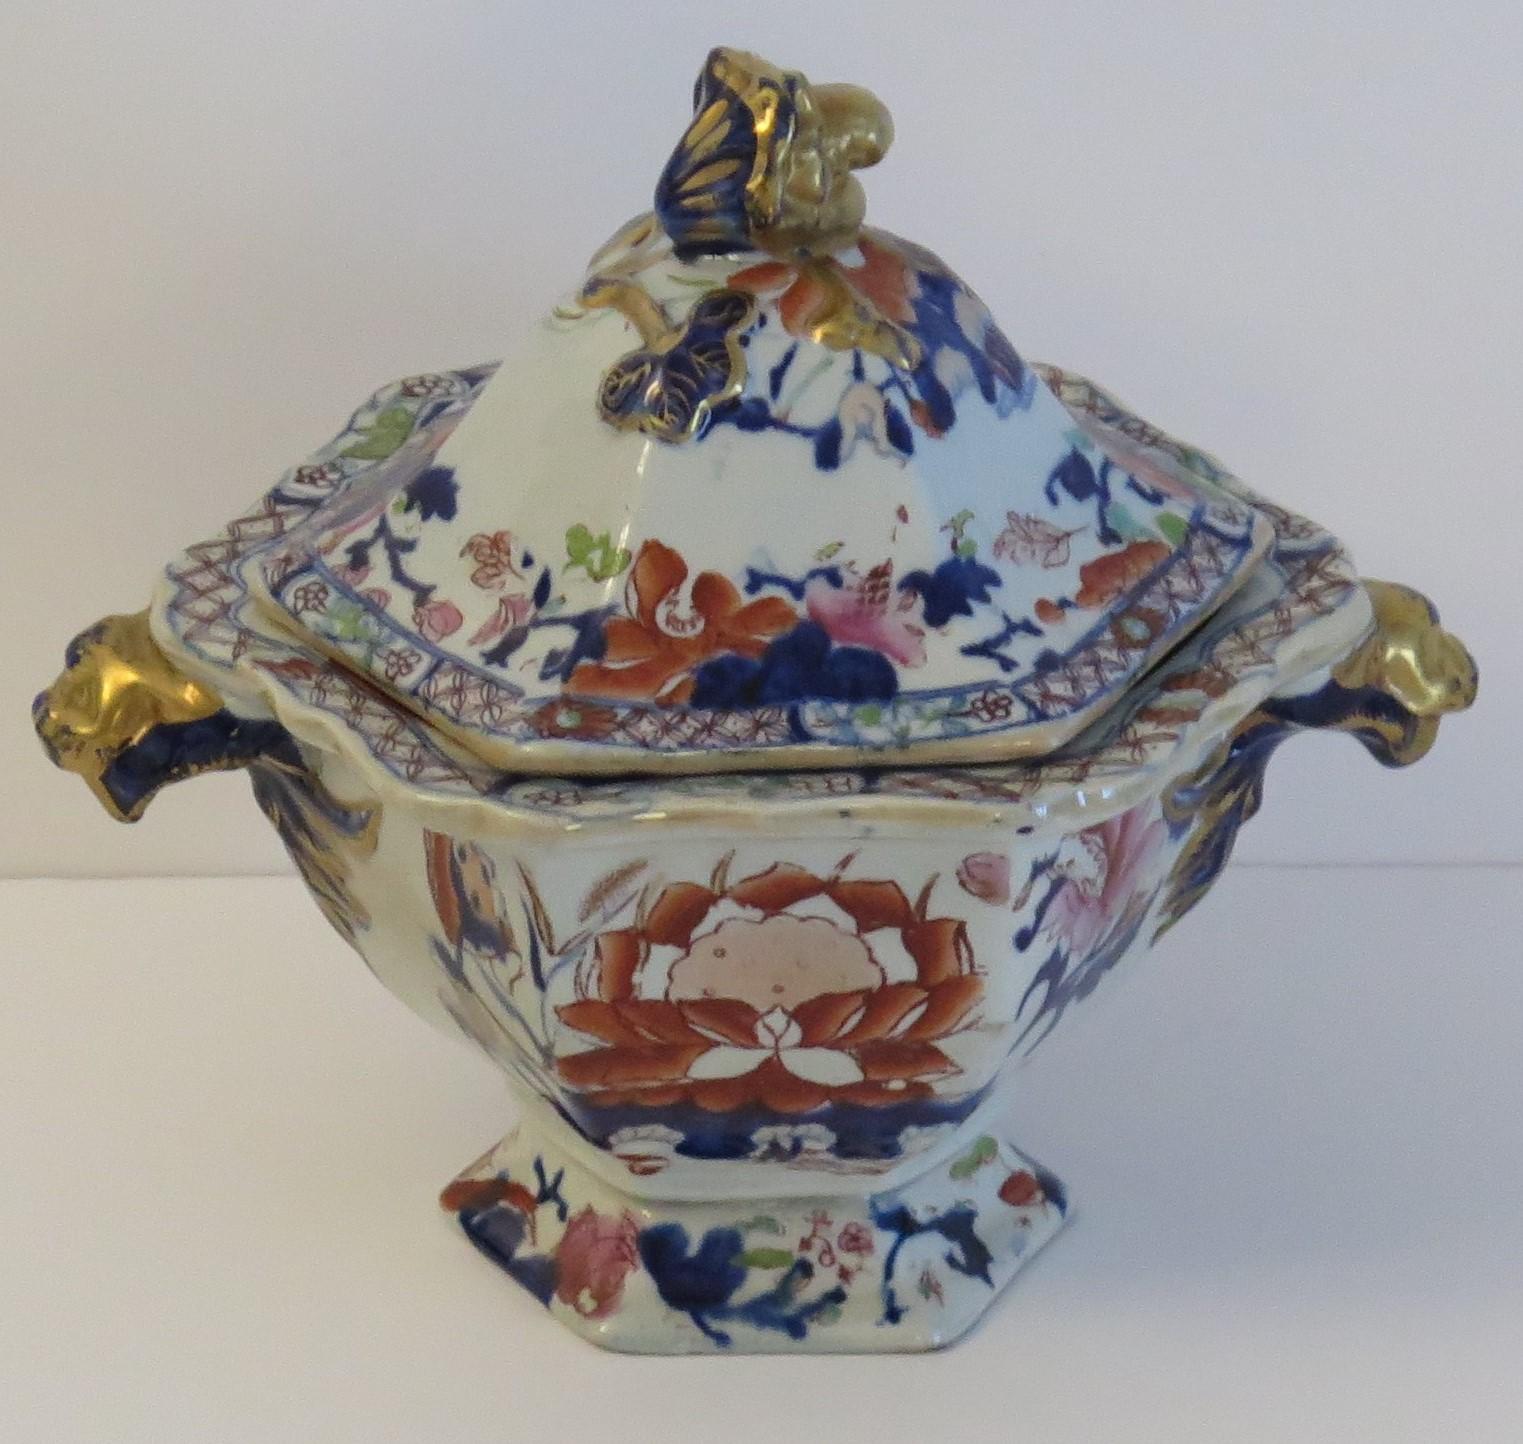 This is a superb Ironstone Sauce Tureen, complete with lid , made by Mason's of Lane Delph, Staffordshire, England, during the early part of the 19th century, circa 1820.

This tureen is well potted and is hexagonal in shape with moulded animal